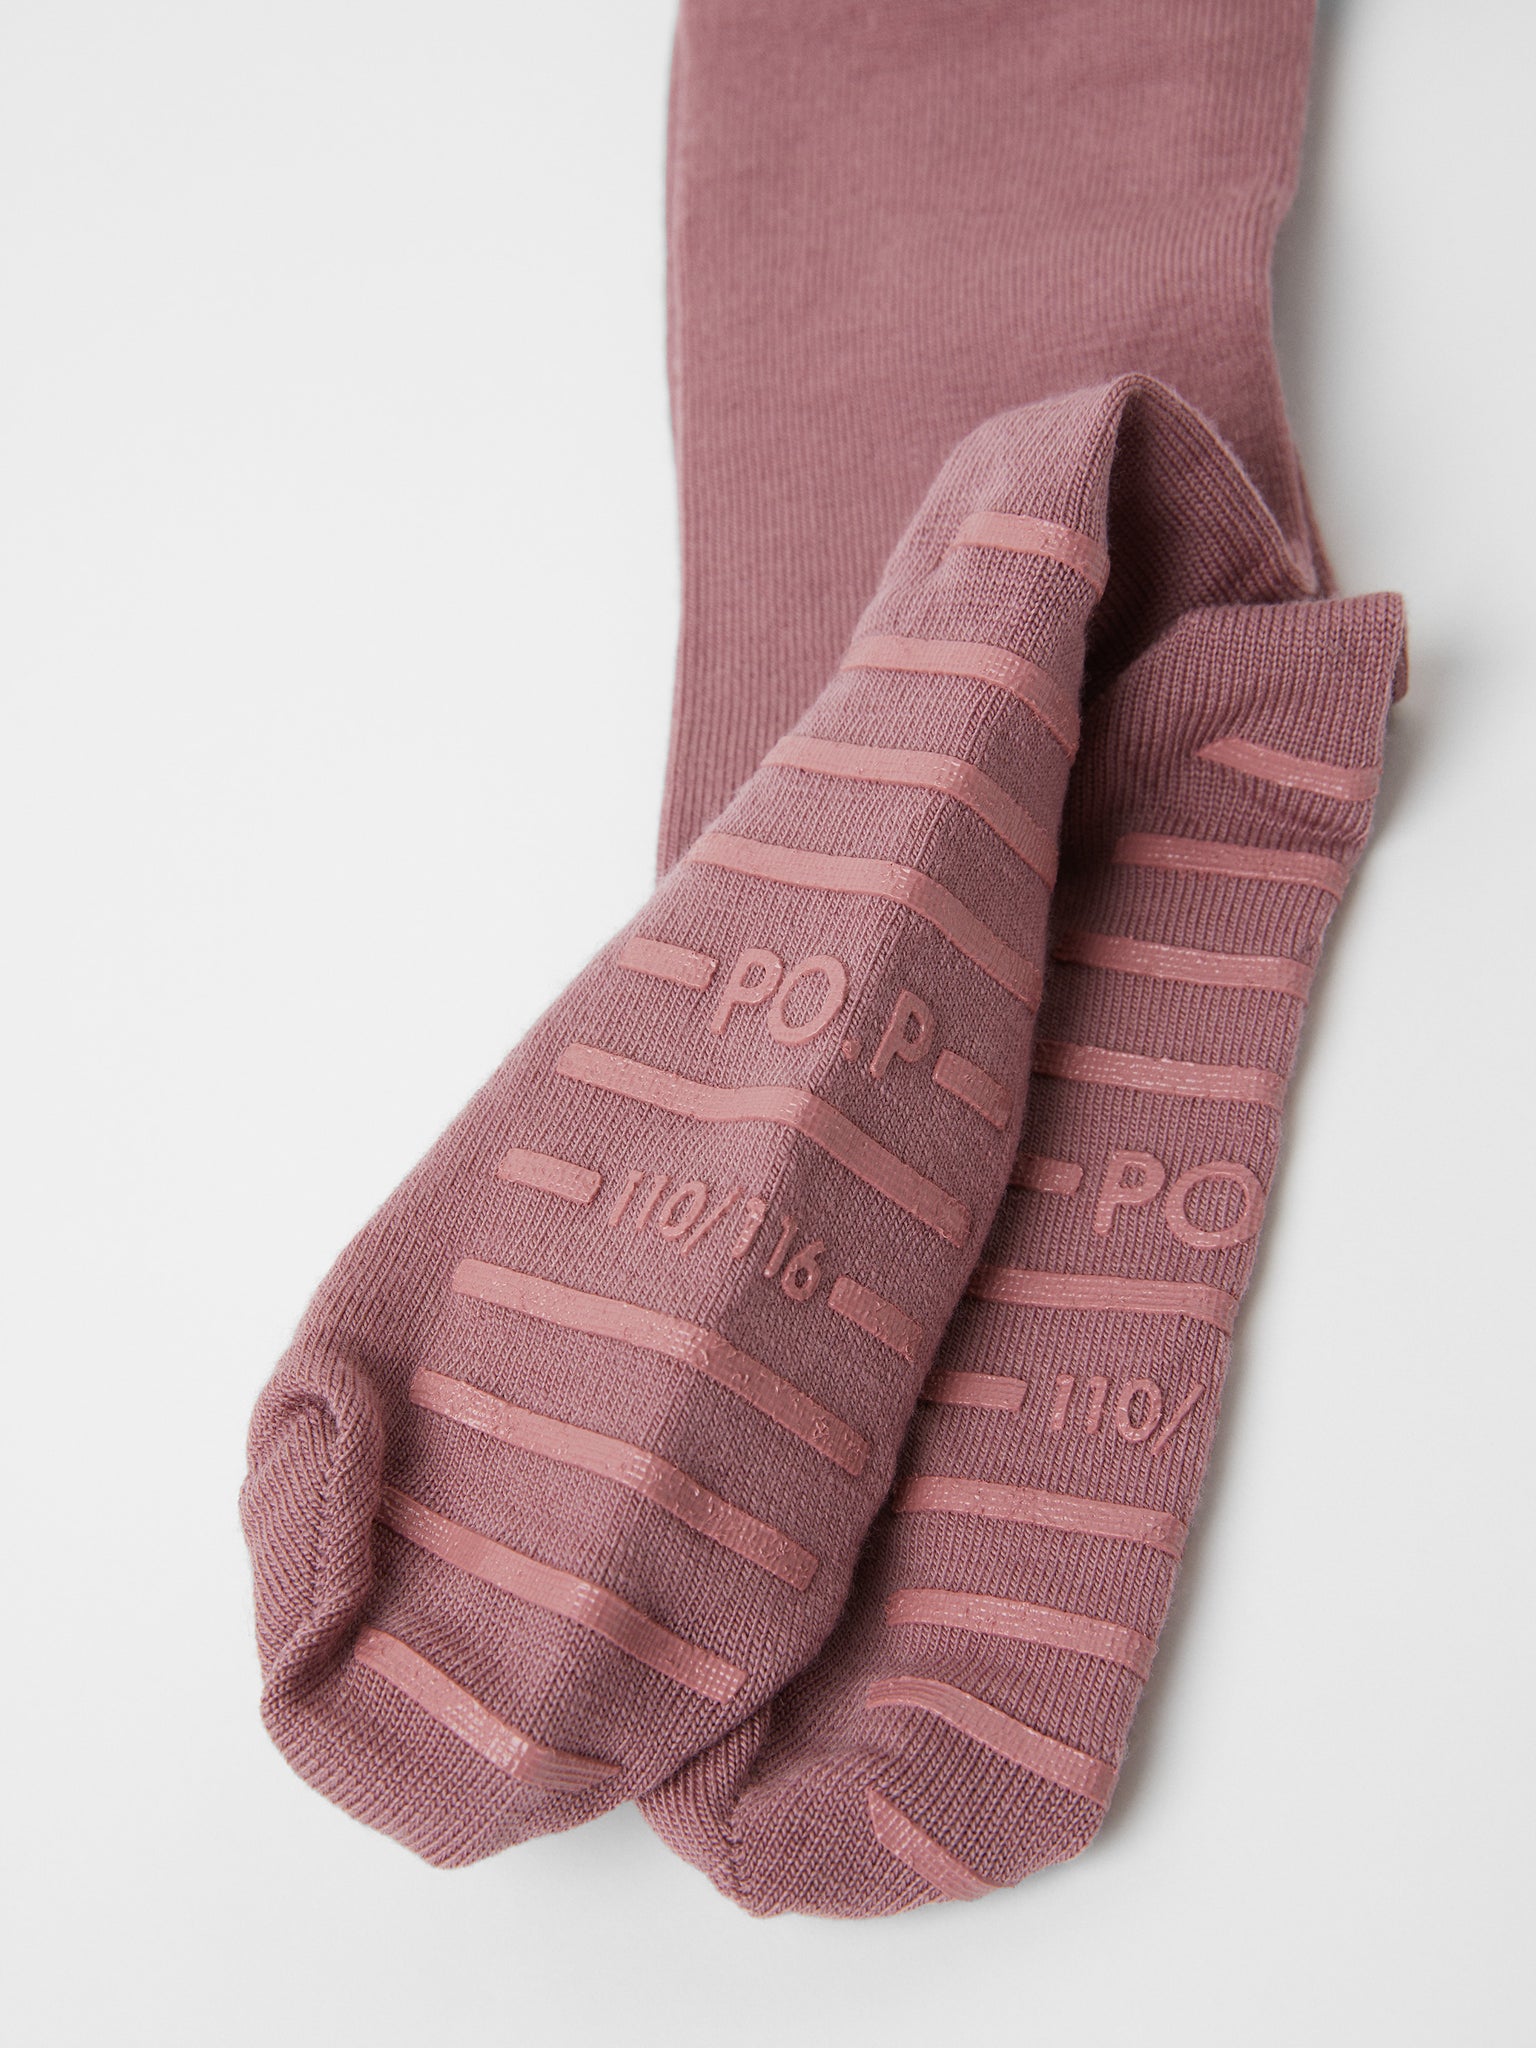 Merino Wool Pink Antislip Kids Tights from the Polarn O. Pyret kidswear collection. Clothes made using sustainably sourced materials.